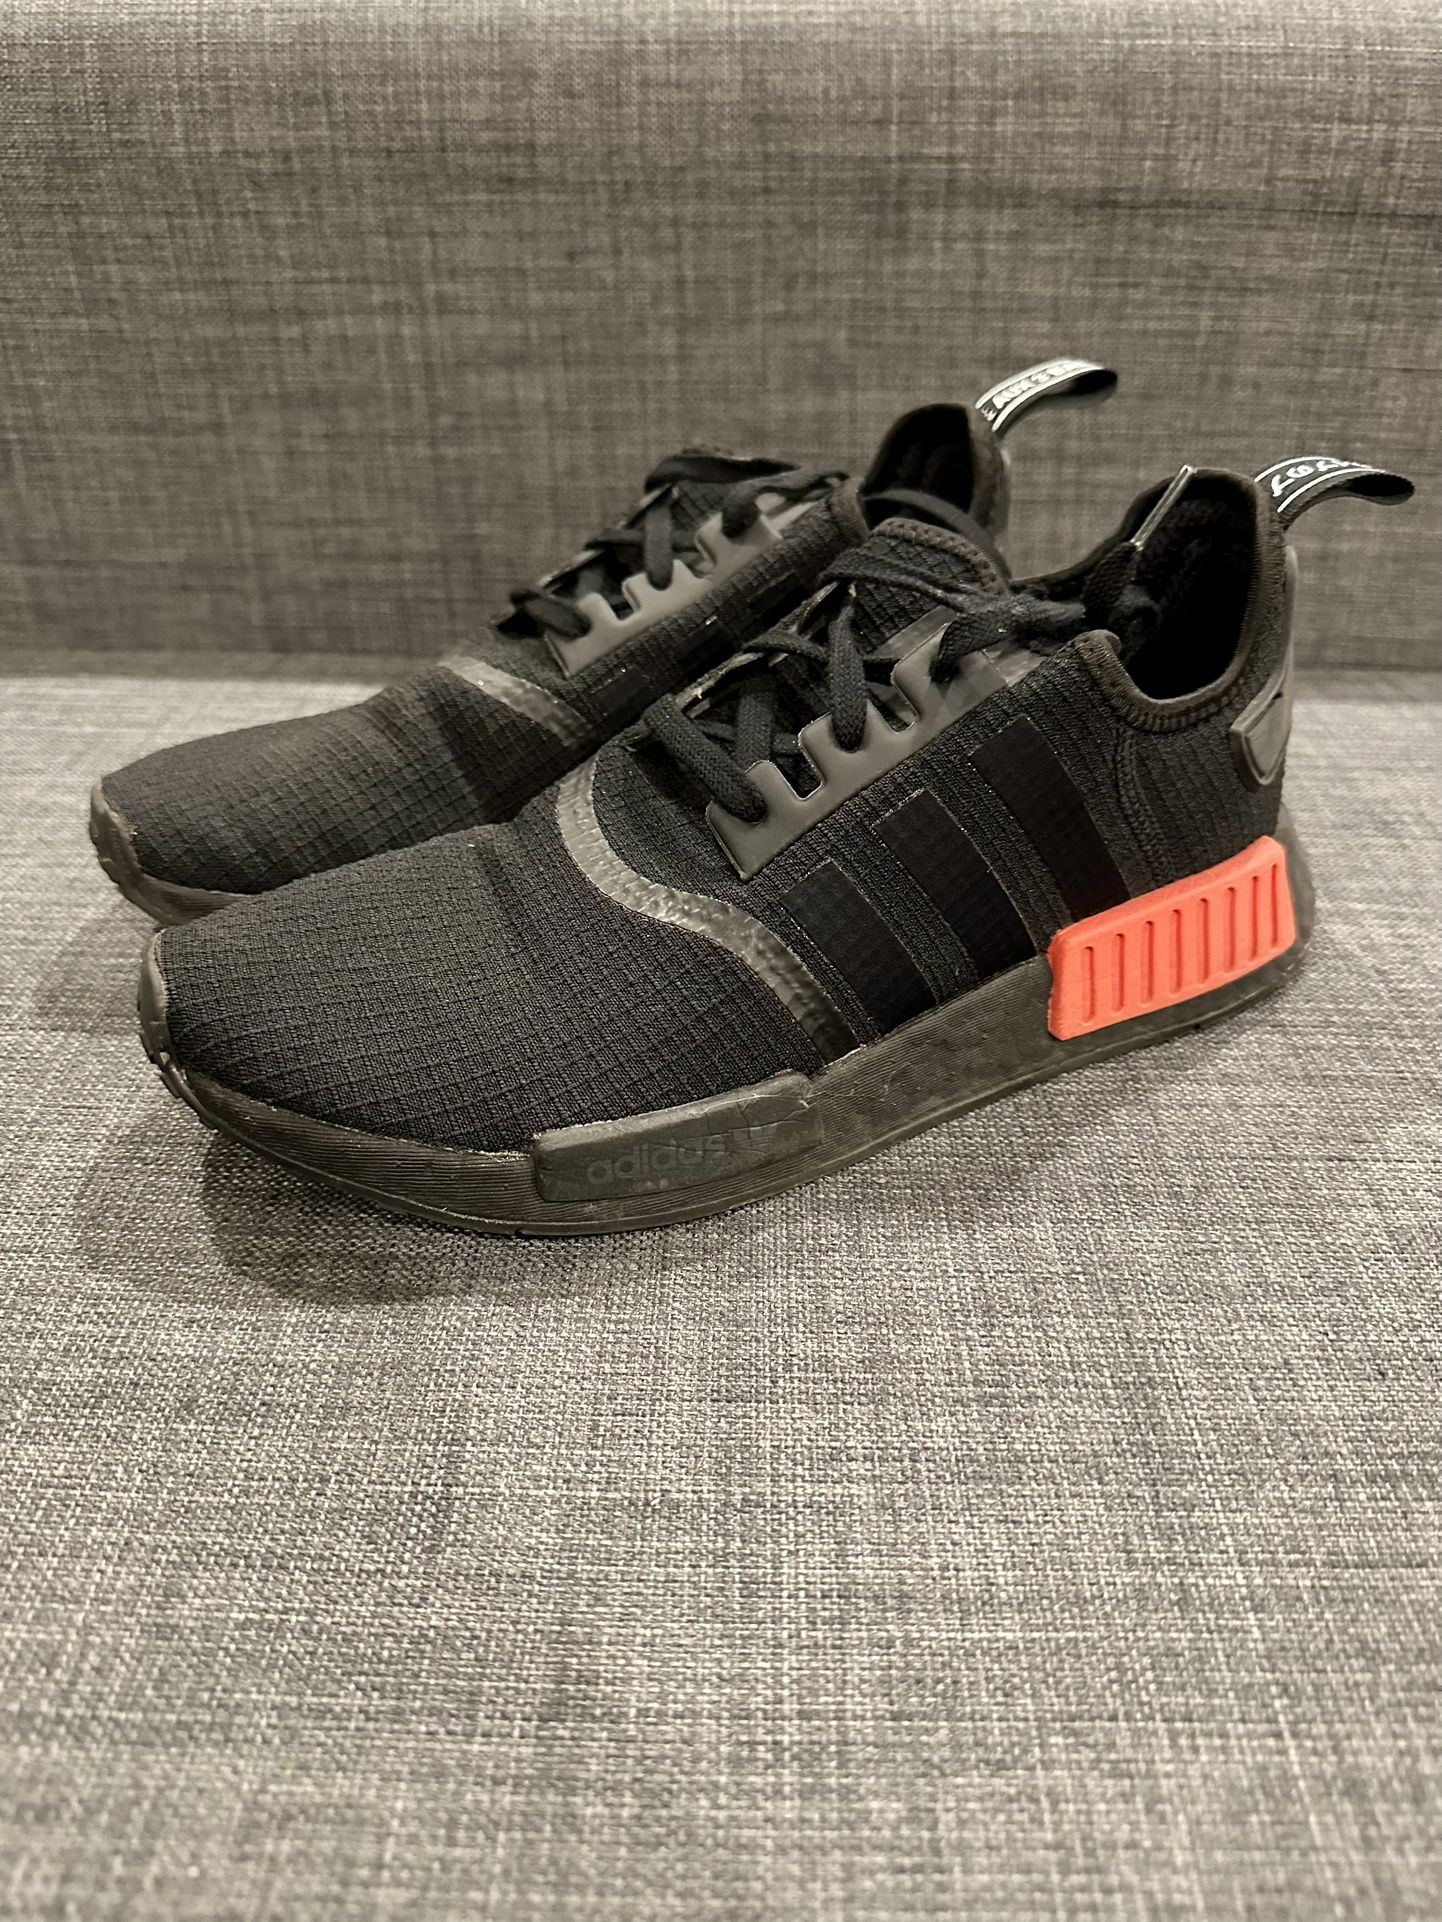 absceso Gobernador Tumor maligno ADIDAS NMD R1 B37618 US Men's Size 8.5 Black Red Champs Exclusive Rare Used  for Sale in Los Angeles, CA - OfferUp